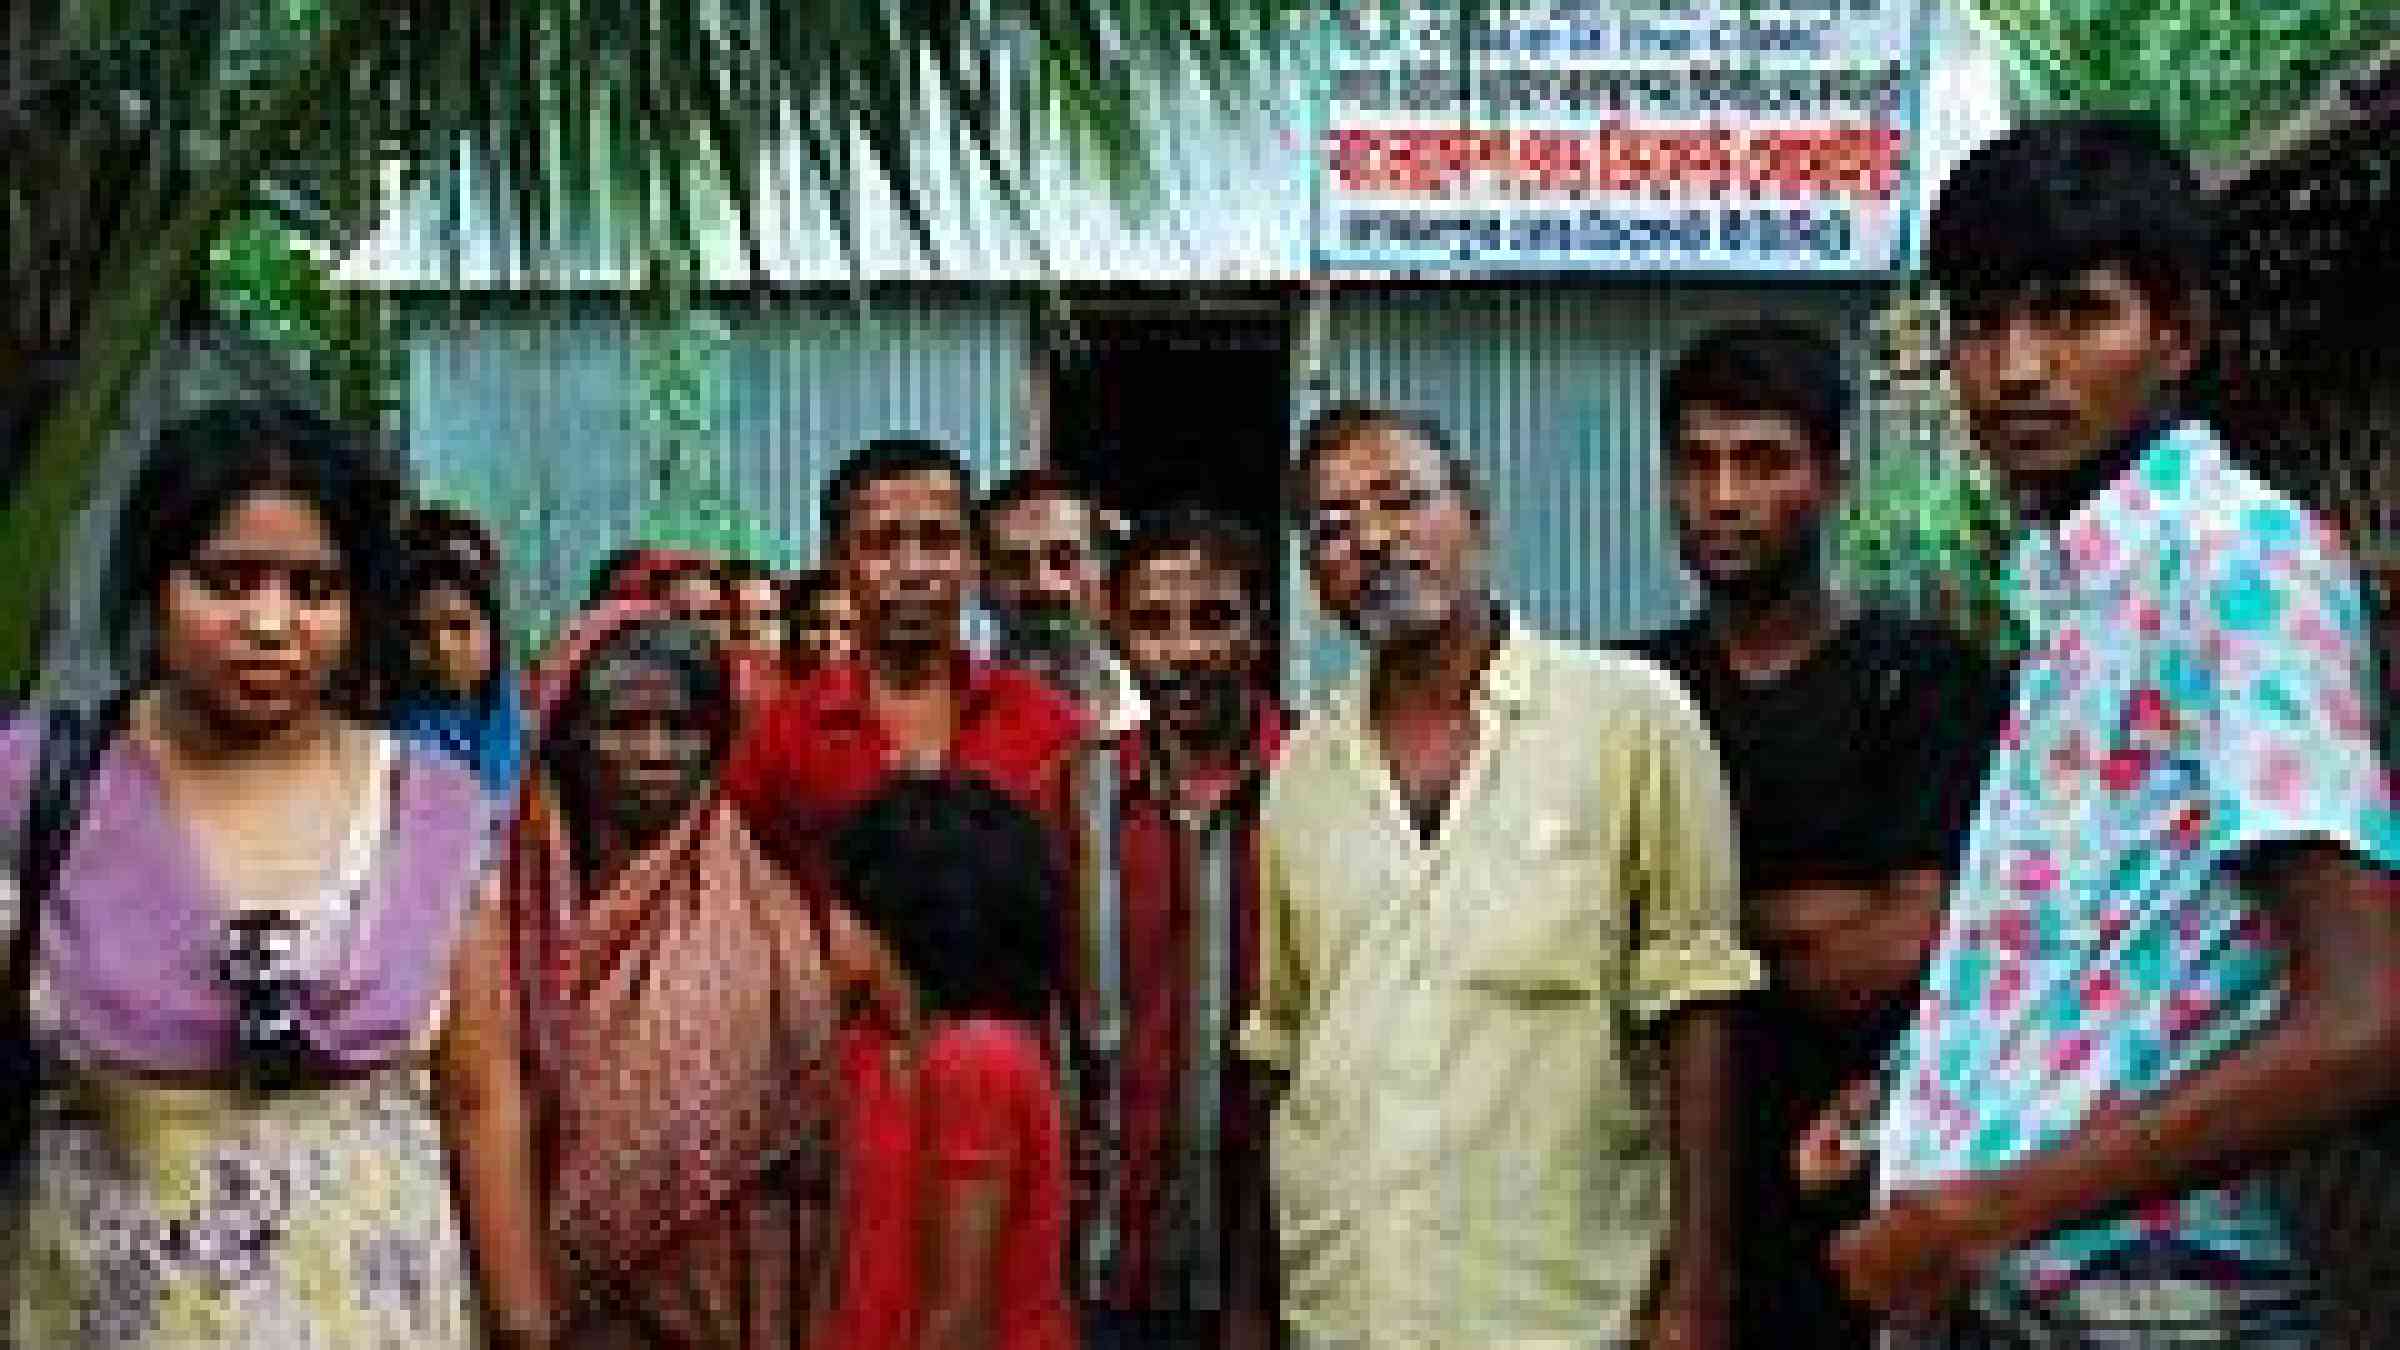 Bangladesh CDMC (community disaster management committee) photo by flickr user amirjina, CC BY-NC-ND 2.0, http://www.flickr.com/photos/amirjina/3729020342/